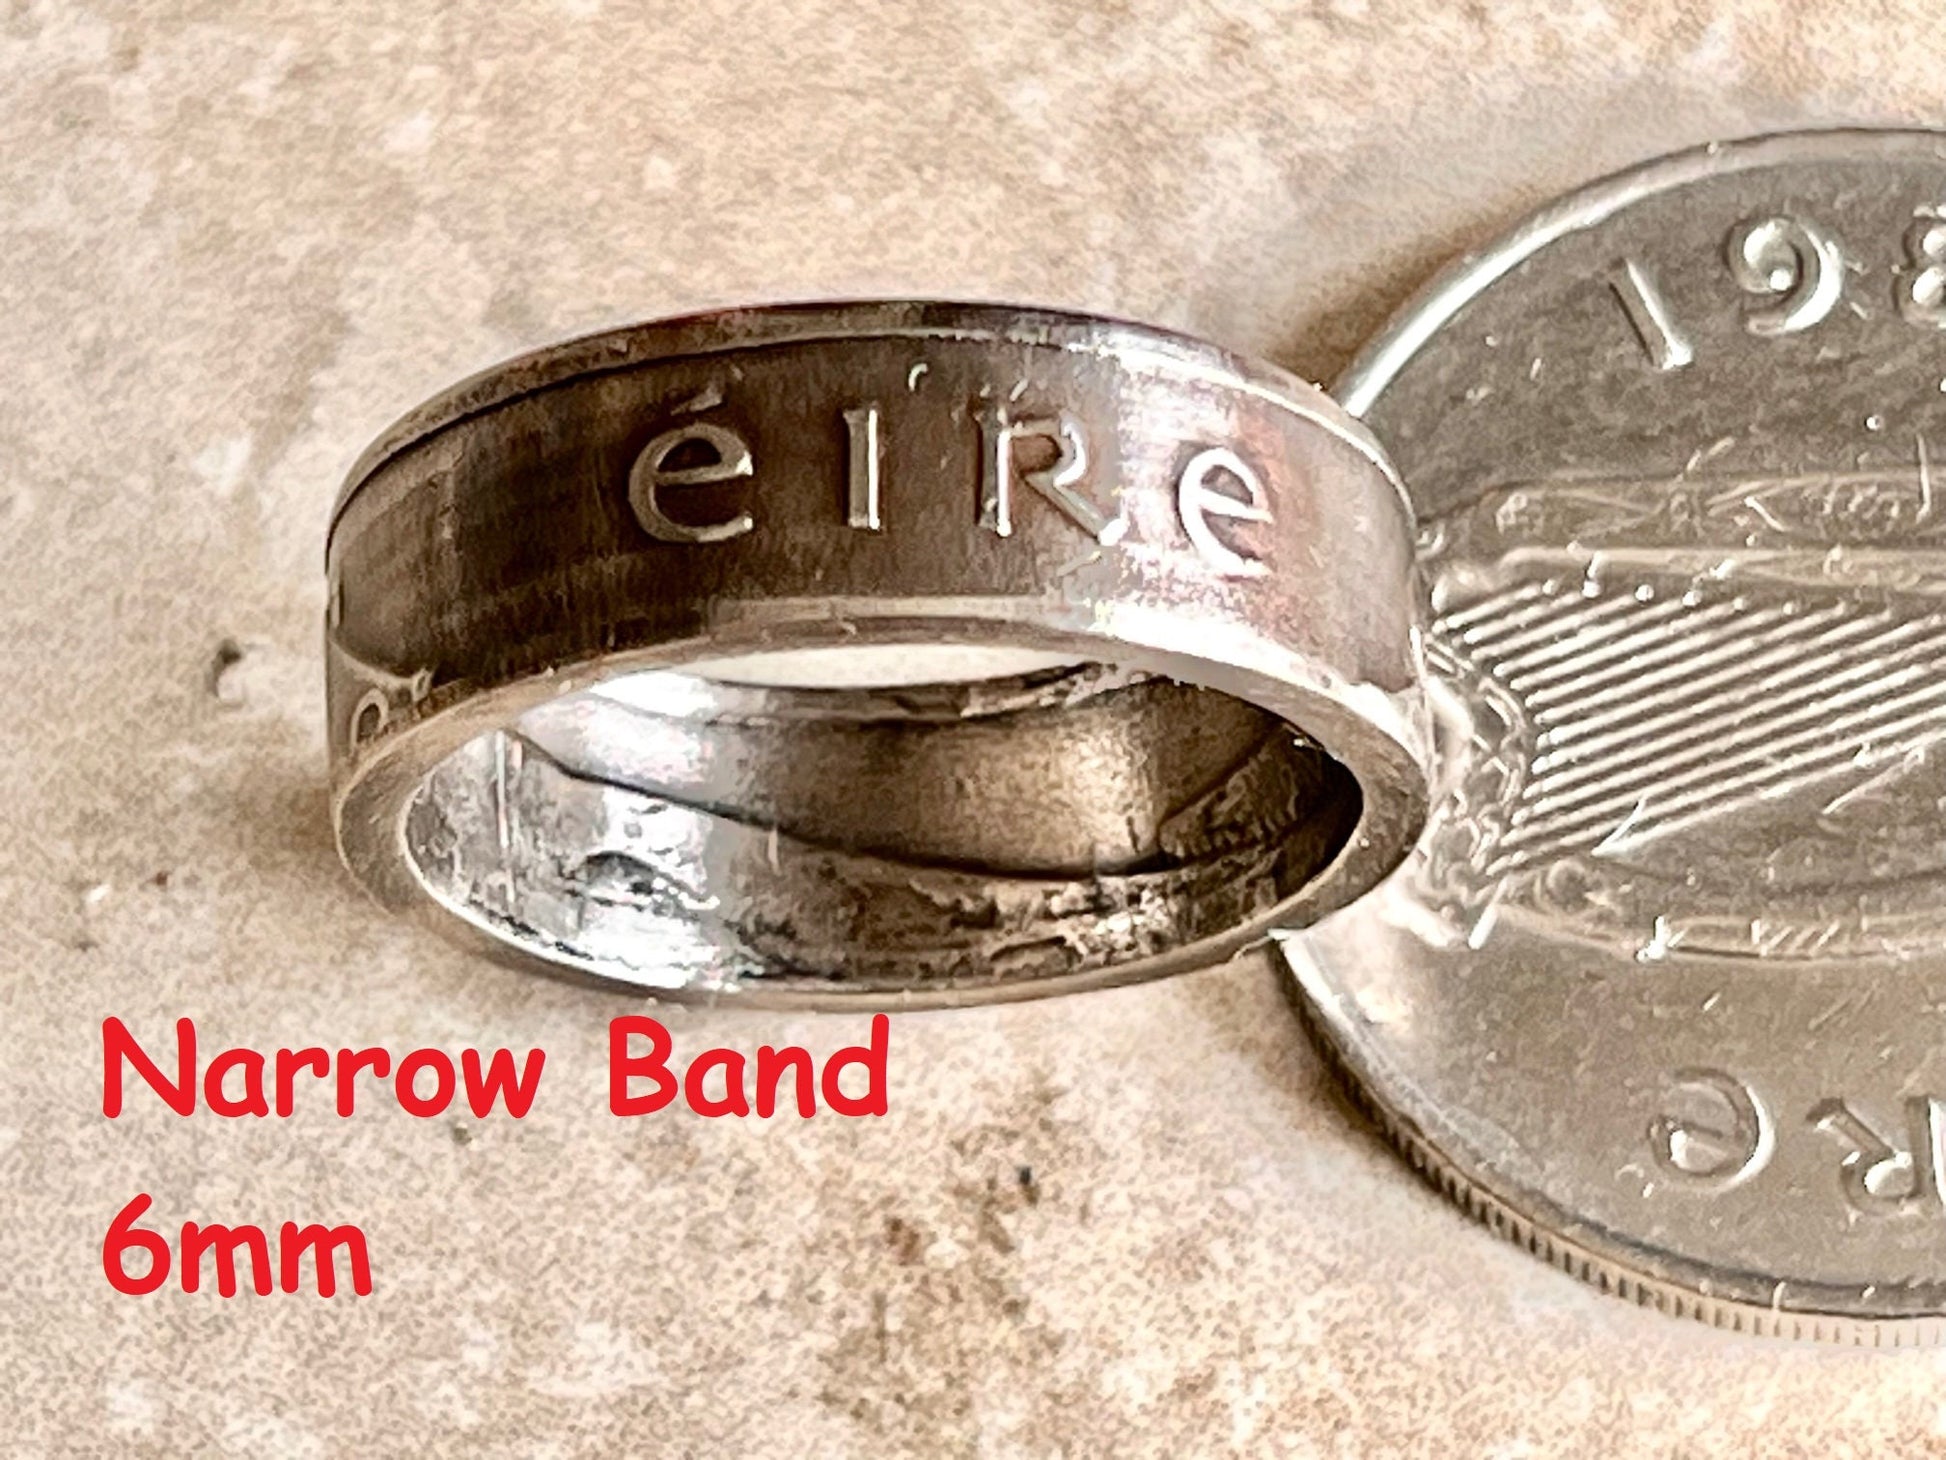 Ireland Coin Ring 10 Pence Irish Celtic Harp Lucky Shamrock Jewelry Gift Charm For Friend Coin Ring Gift For Him Her World Coins Collector